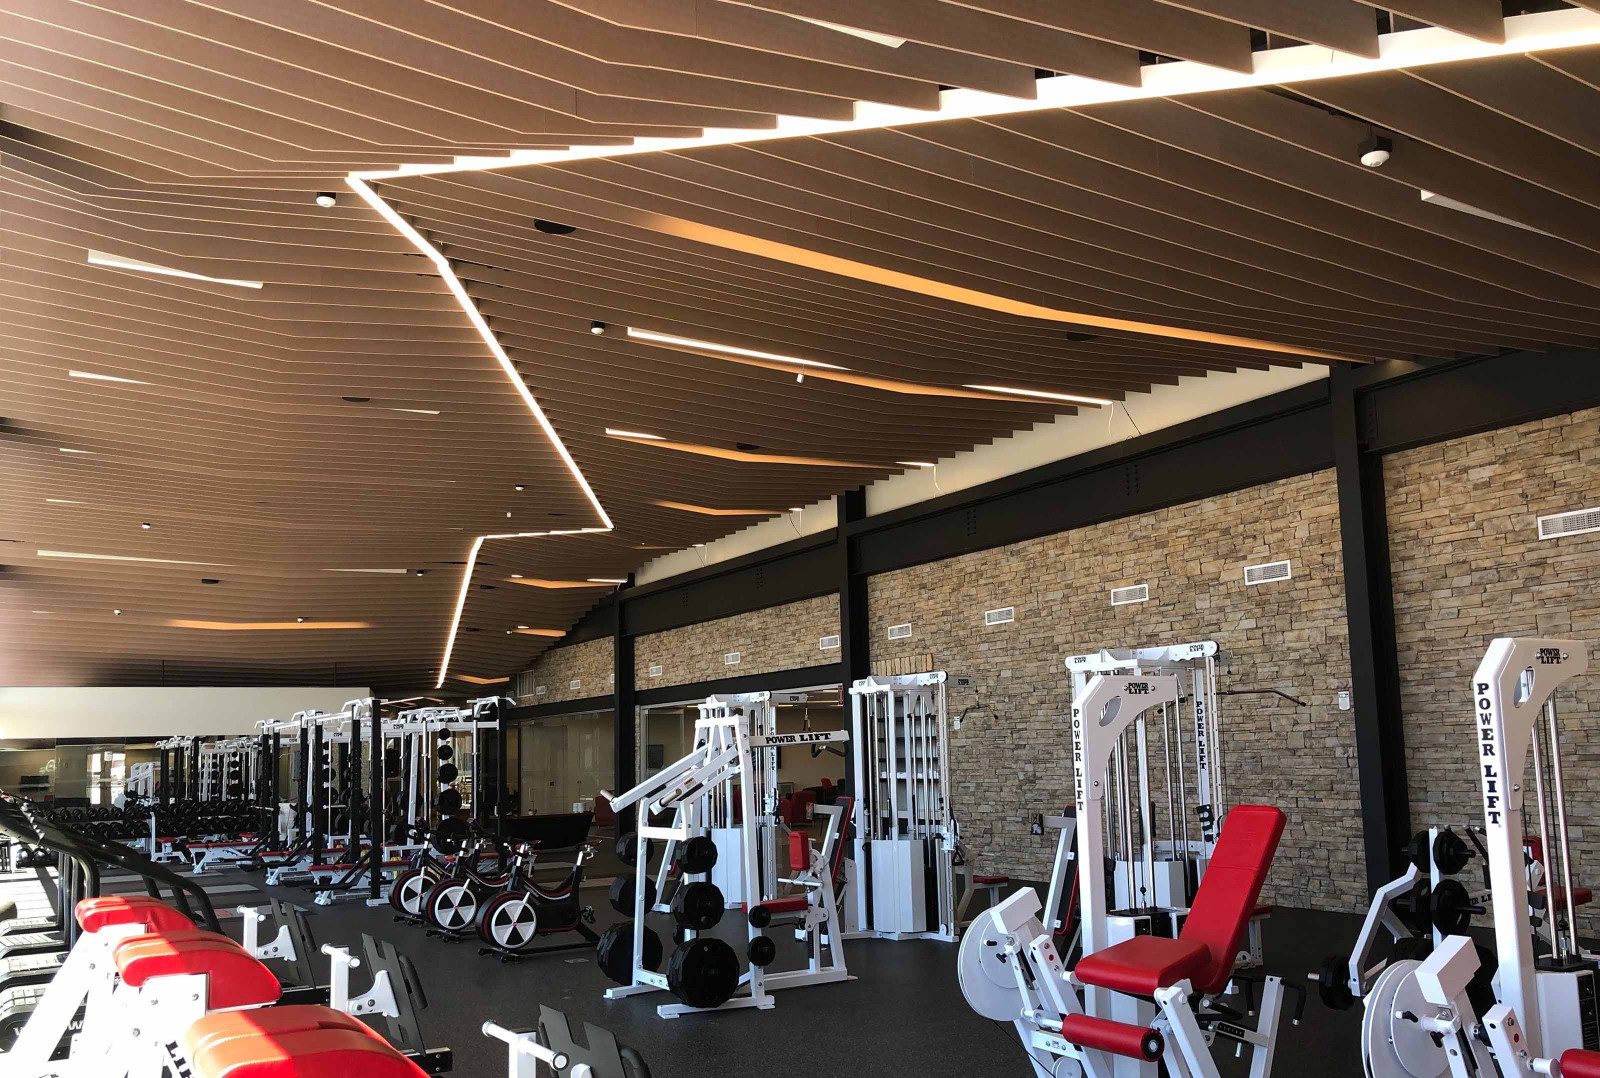 Maximize the Physical and Mental Benefits of Fitness by Infusing a Space with Energy